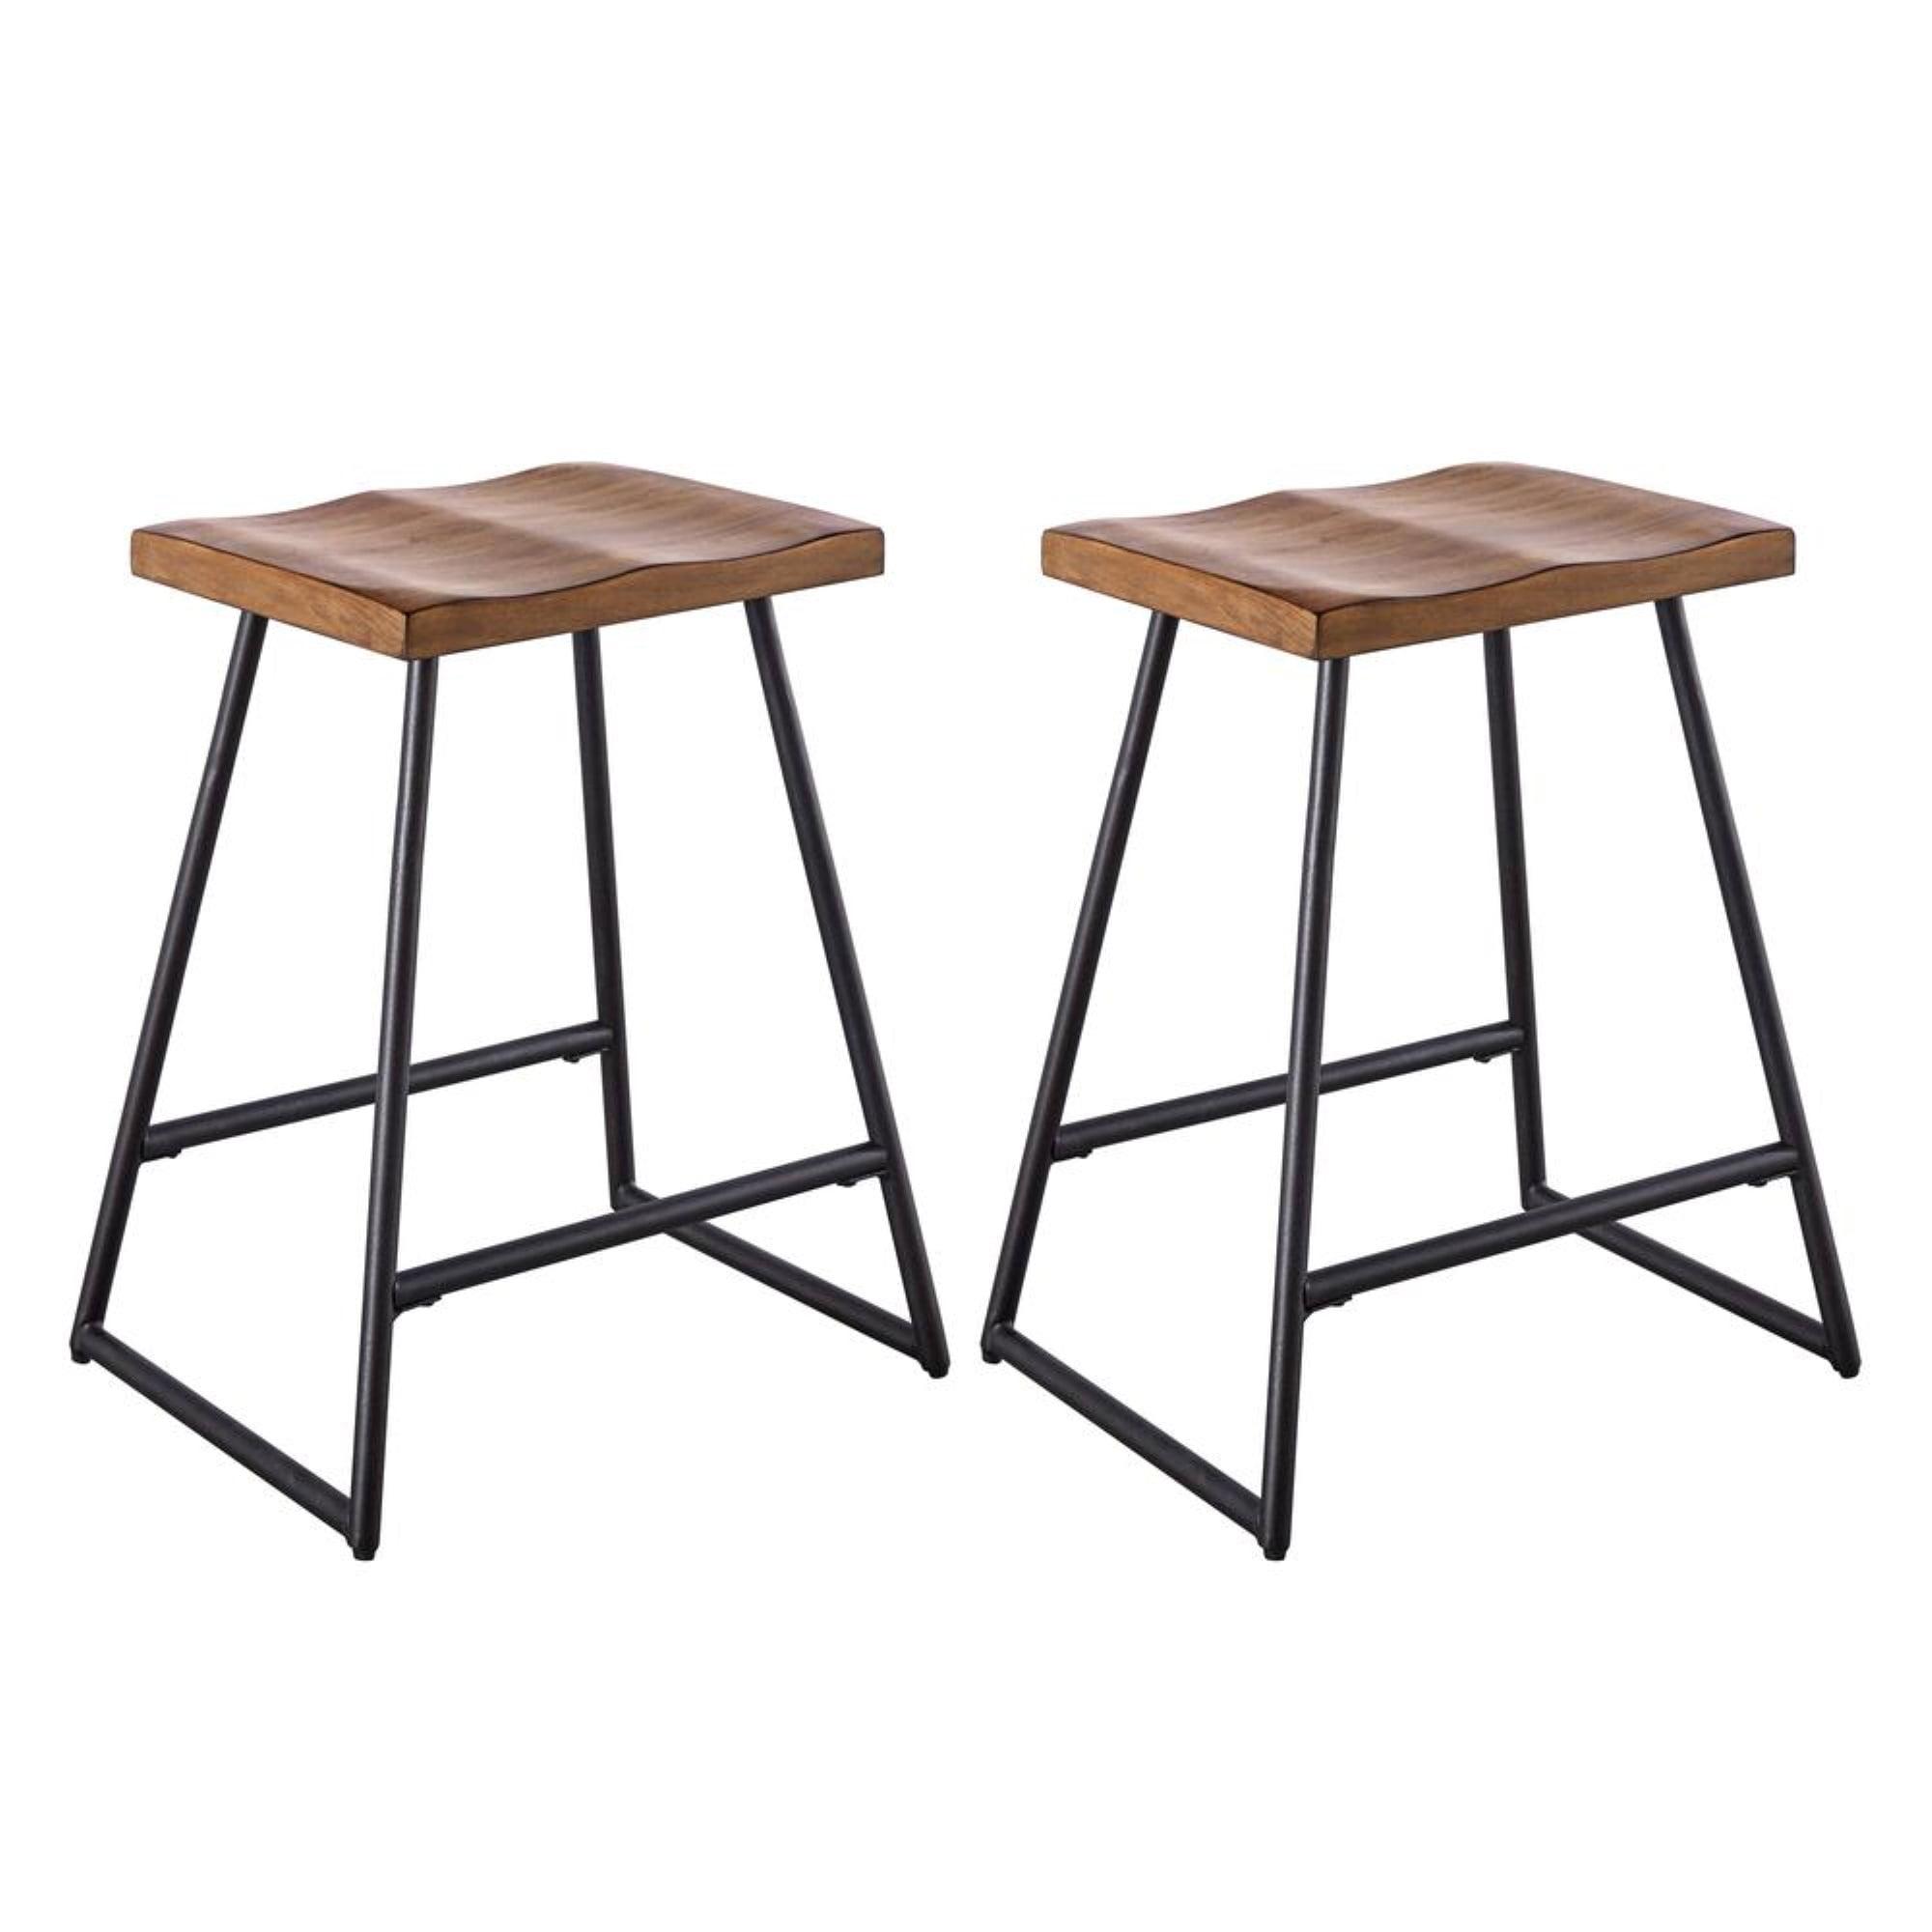 Rustic Saddle Style Brown Wood and Metal Counter Stool, 25" Height